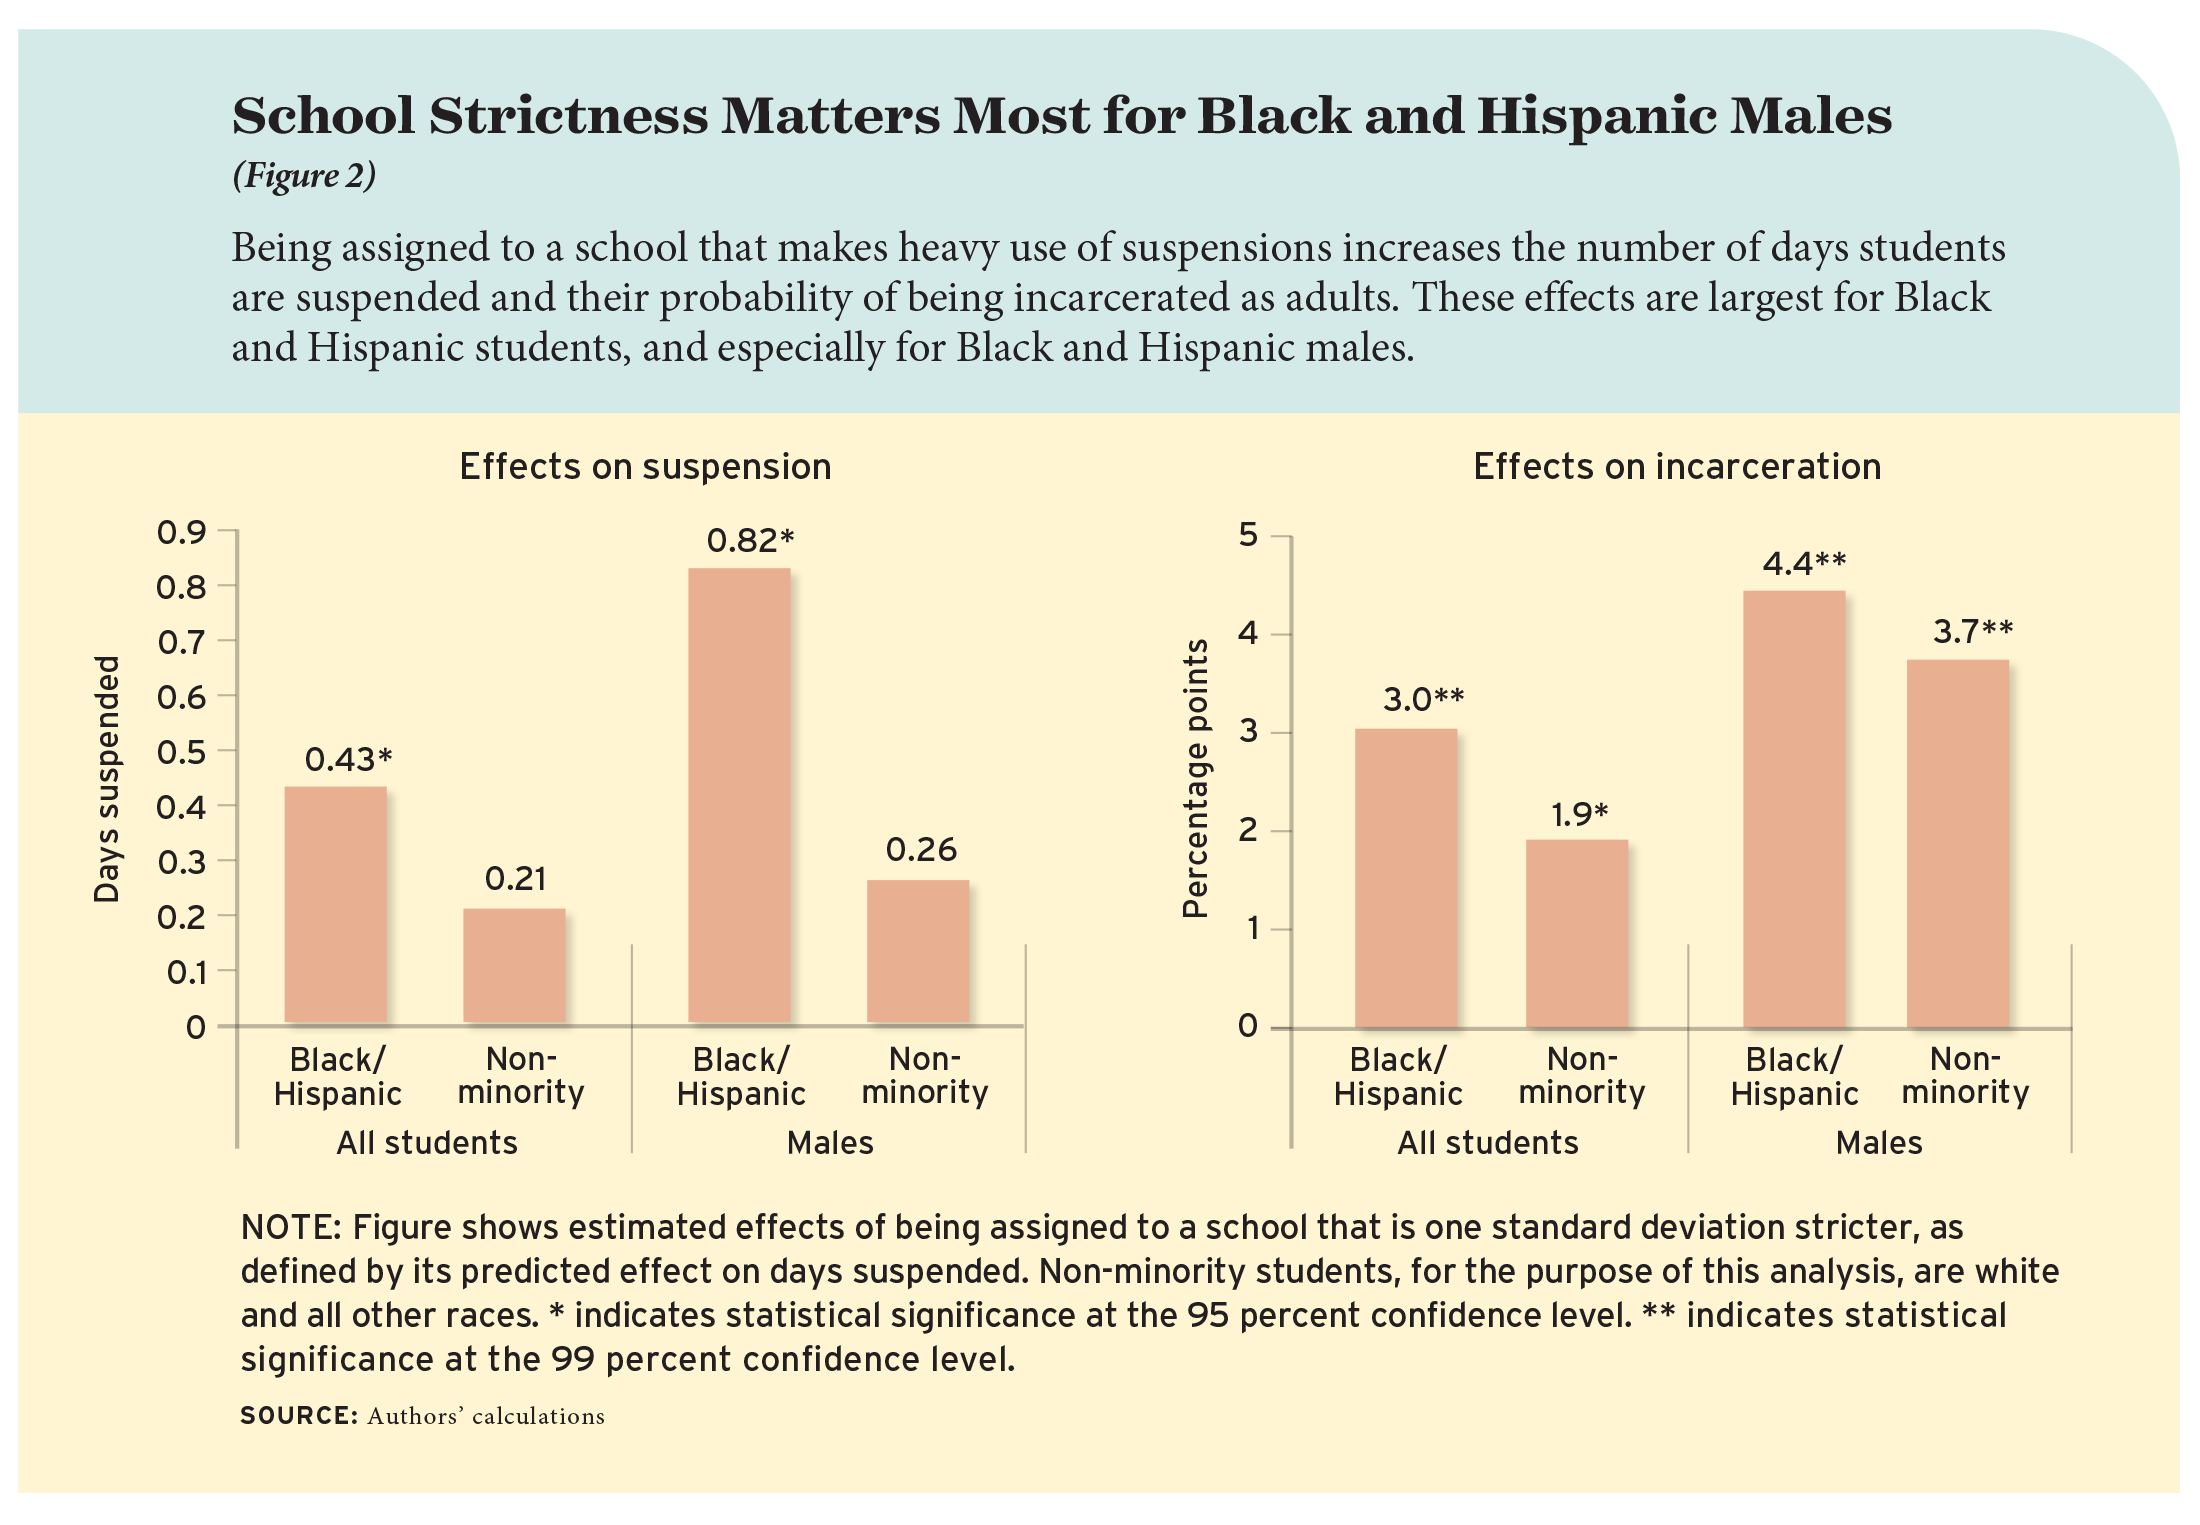 School strictness matters most for Black and Hispanic males.